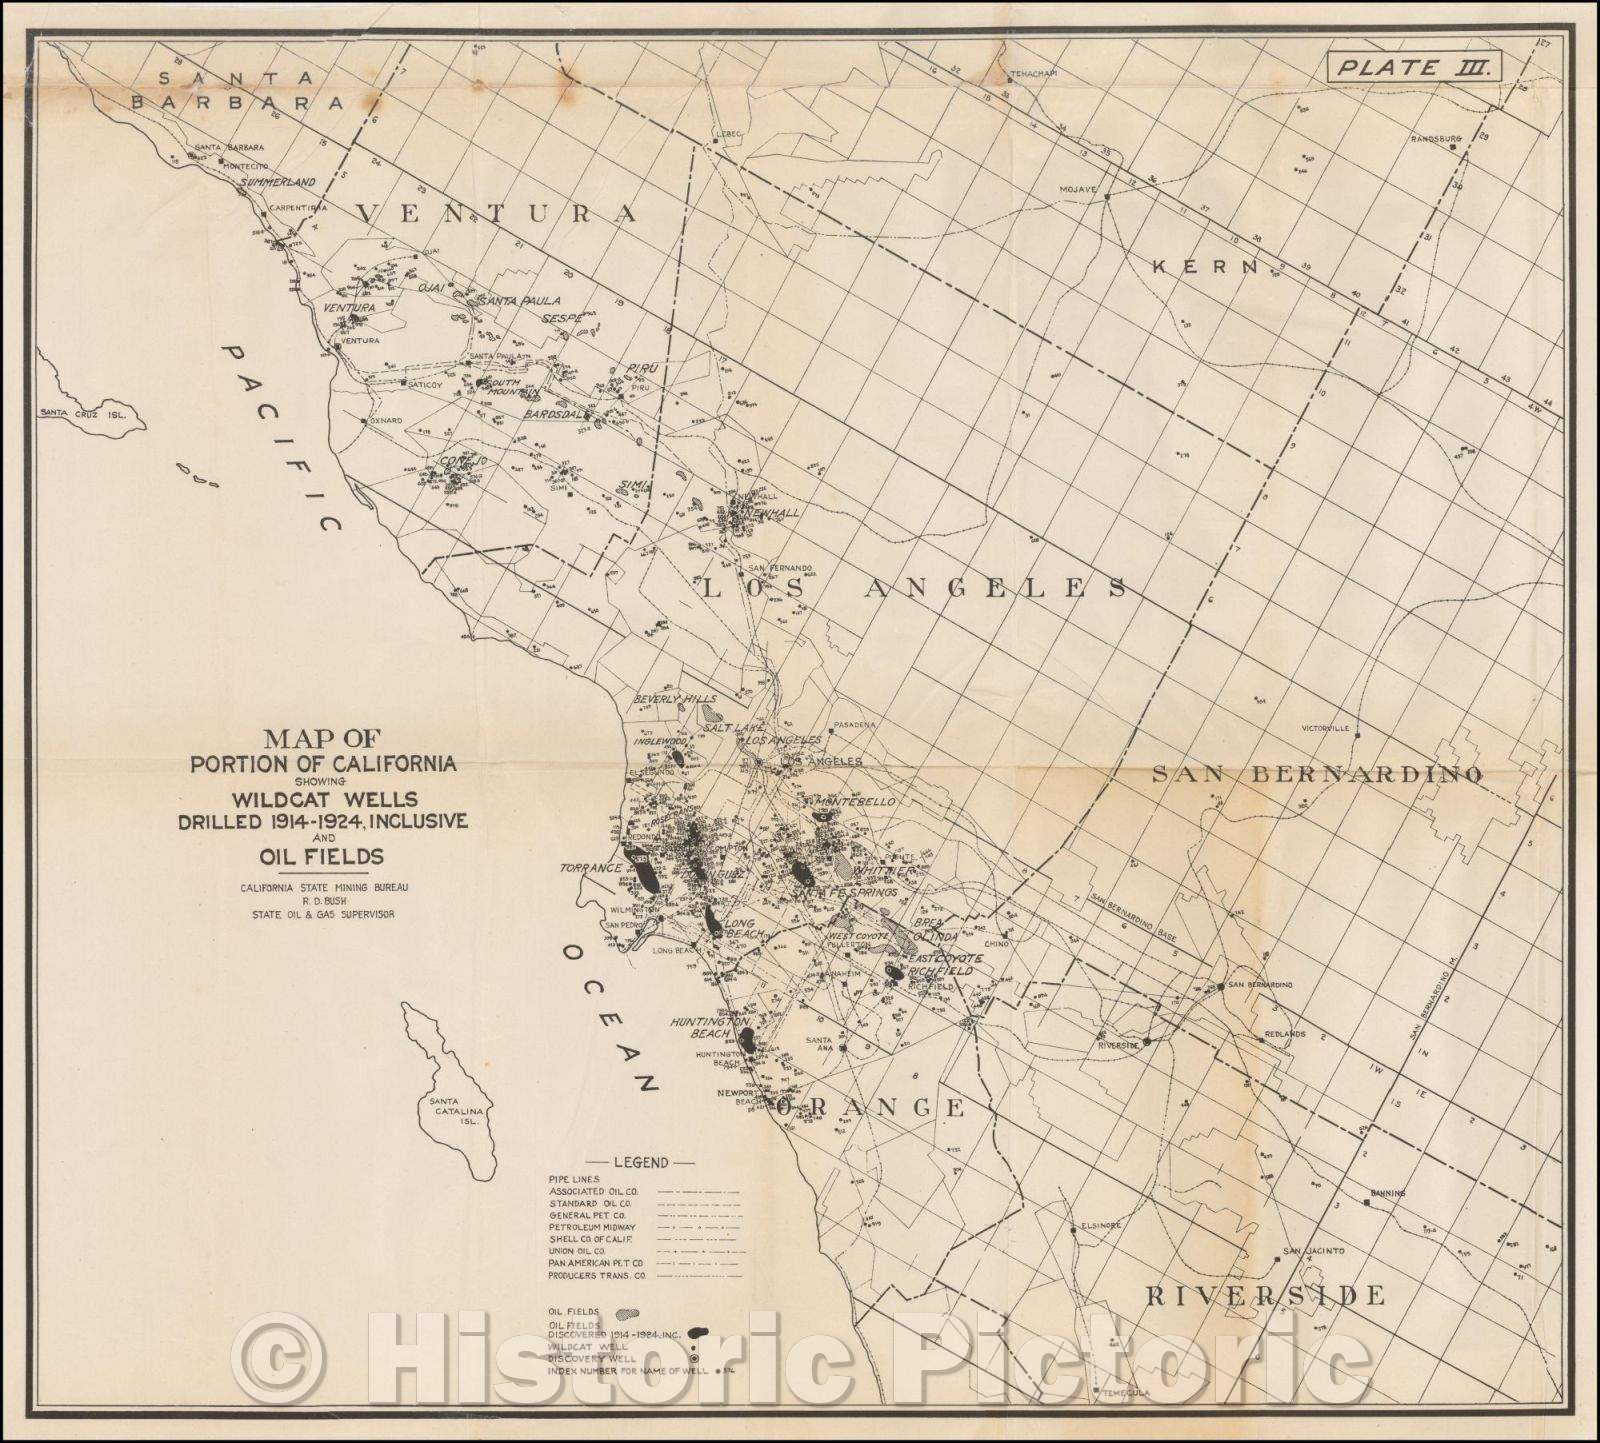 Historic Map - Southern California Oil Drilling Map of Portion of California Showing Wildcat Wells Drilled 1914-1924, inclusive and Oil Fields, 1925 - Vintage Wall Art